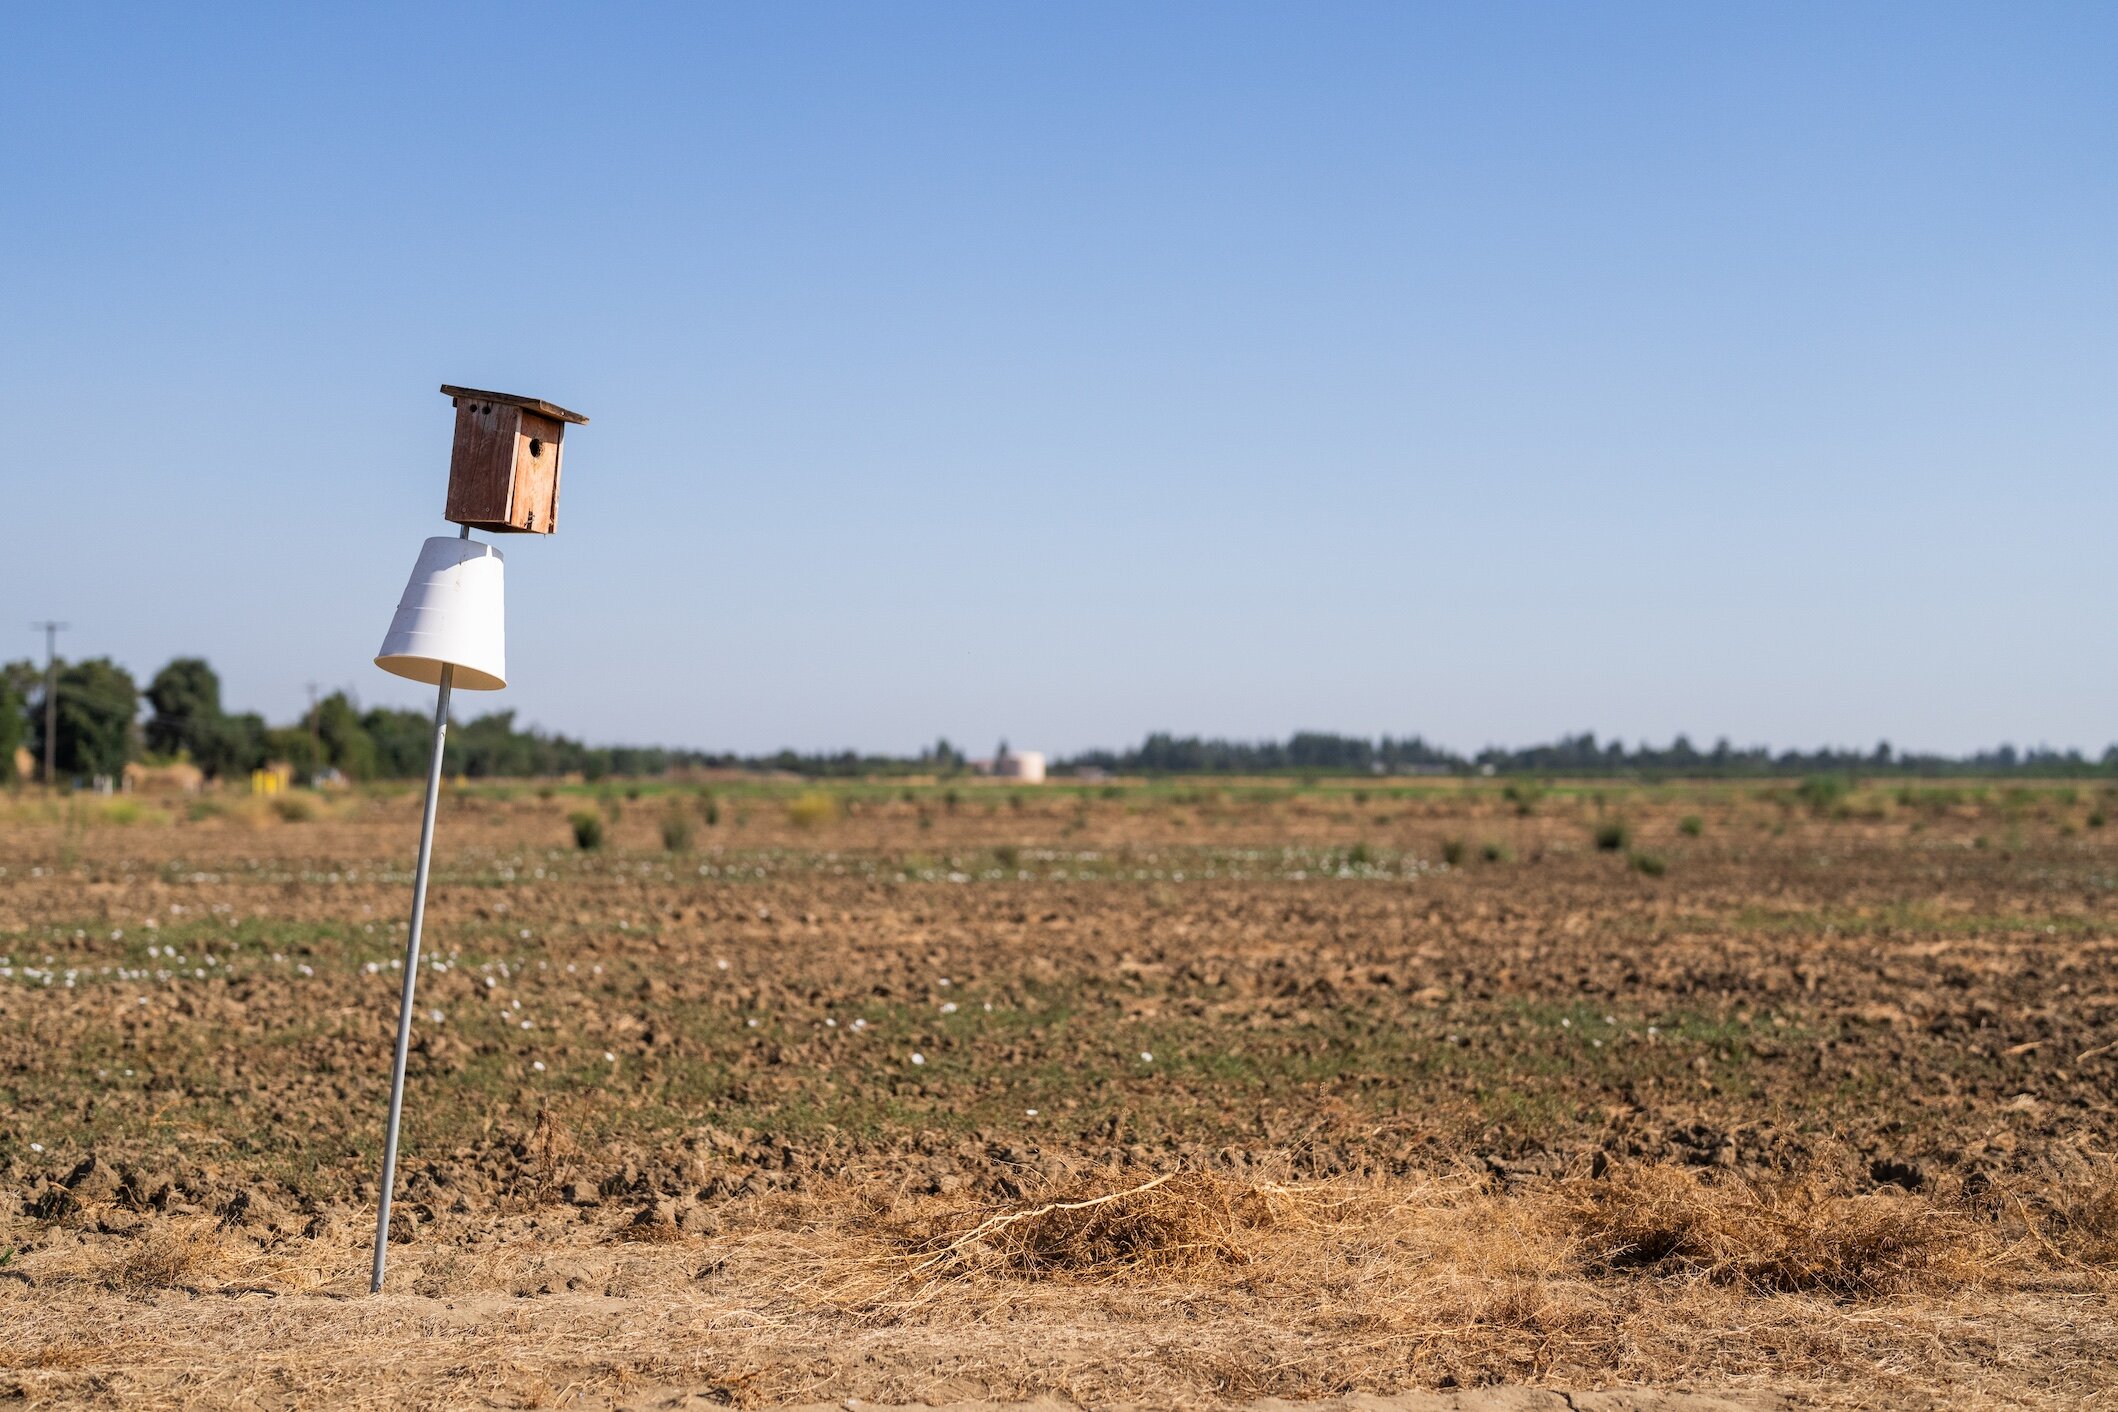 Heat waves harm bird reproduction on agricultural lands, research suggests